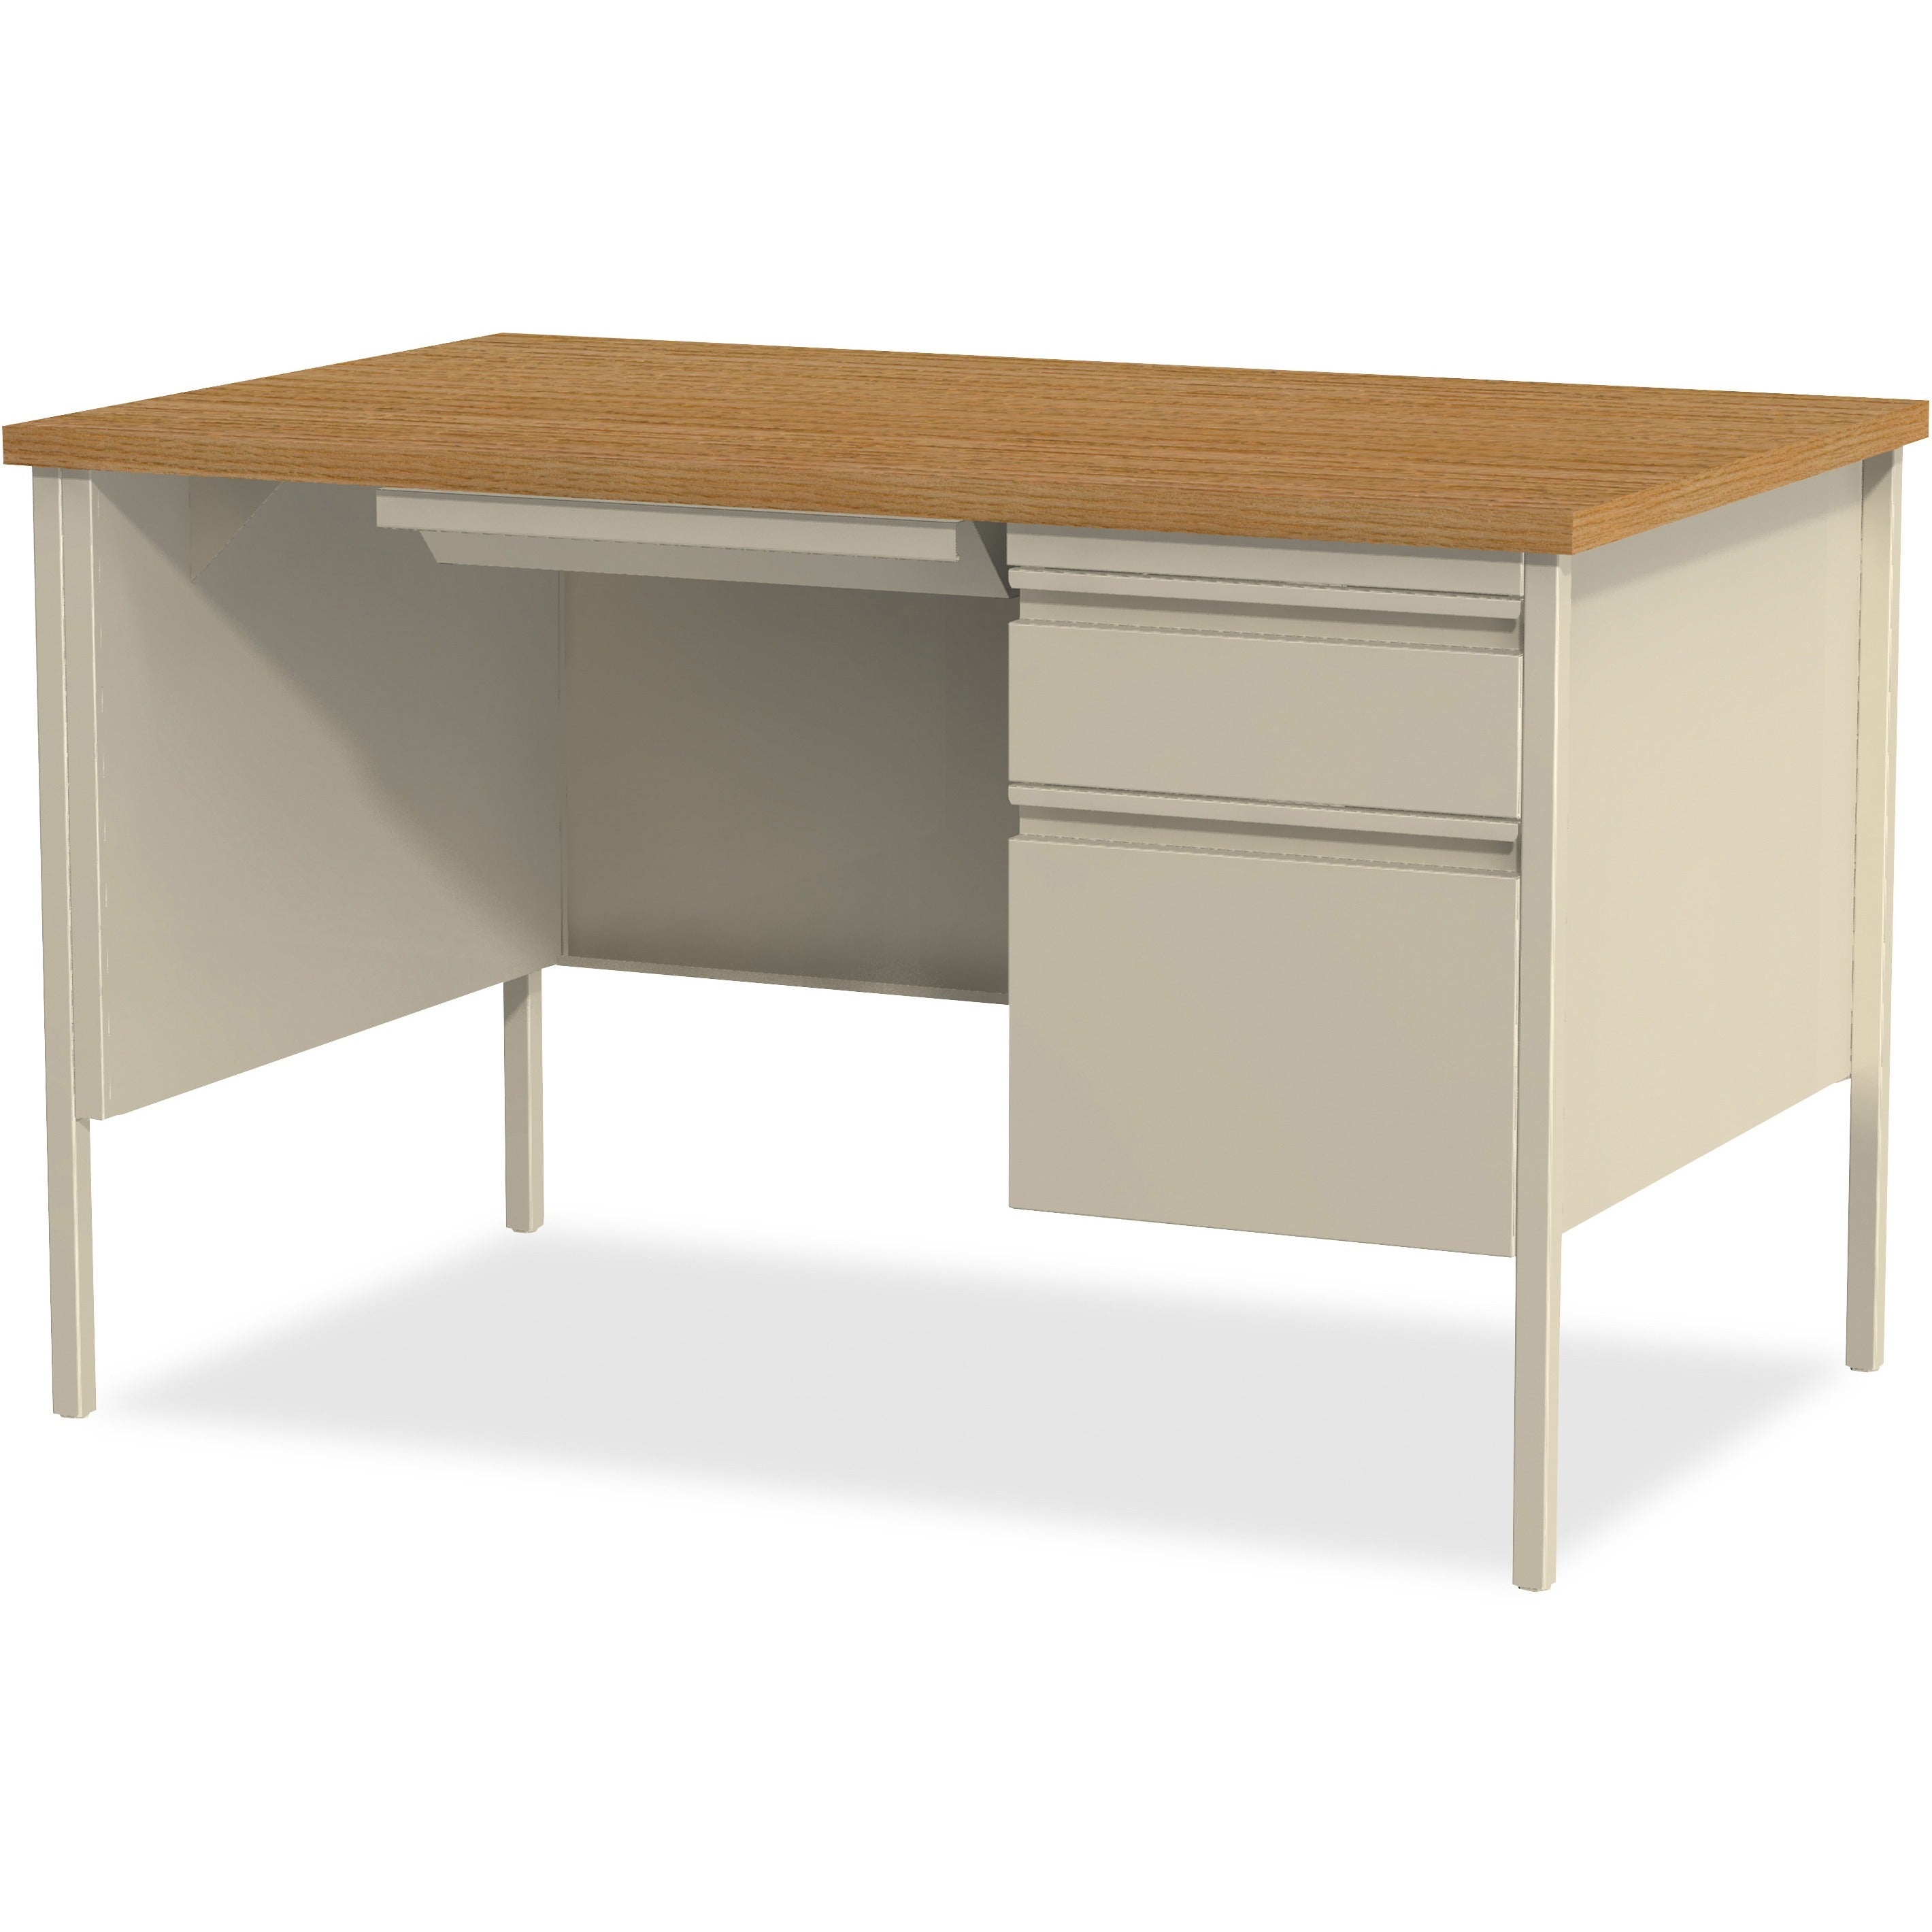 lorell-fortress-series-48-right-single-pedestal-desk-for-table-topoak-laminate-rectangle-top-30-table-top-length-x-48-table-top-width-x-113-table-top-thickness-2950-height-assembly-required-oak-putty-steel-1-each_llr66908 - 3